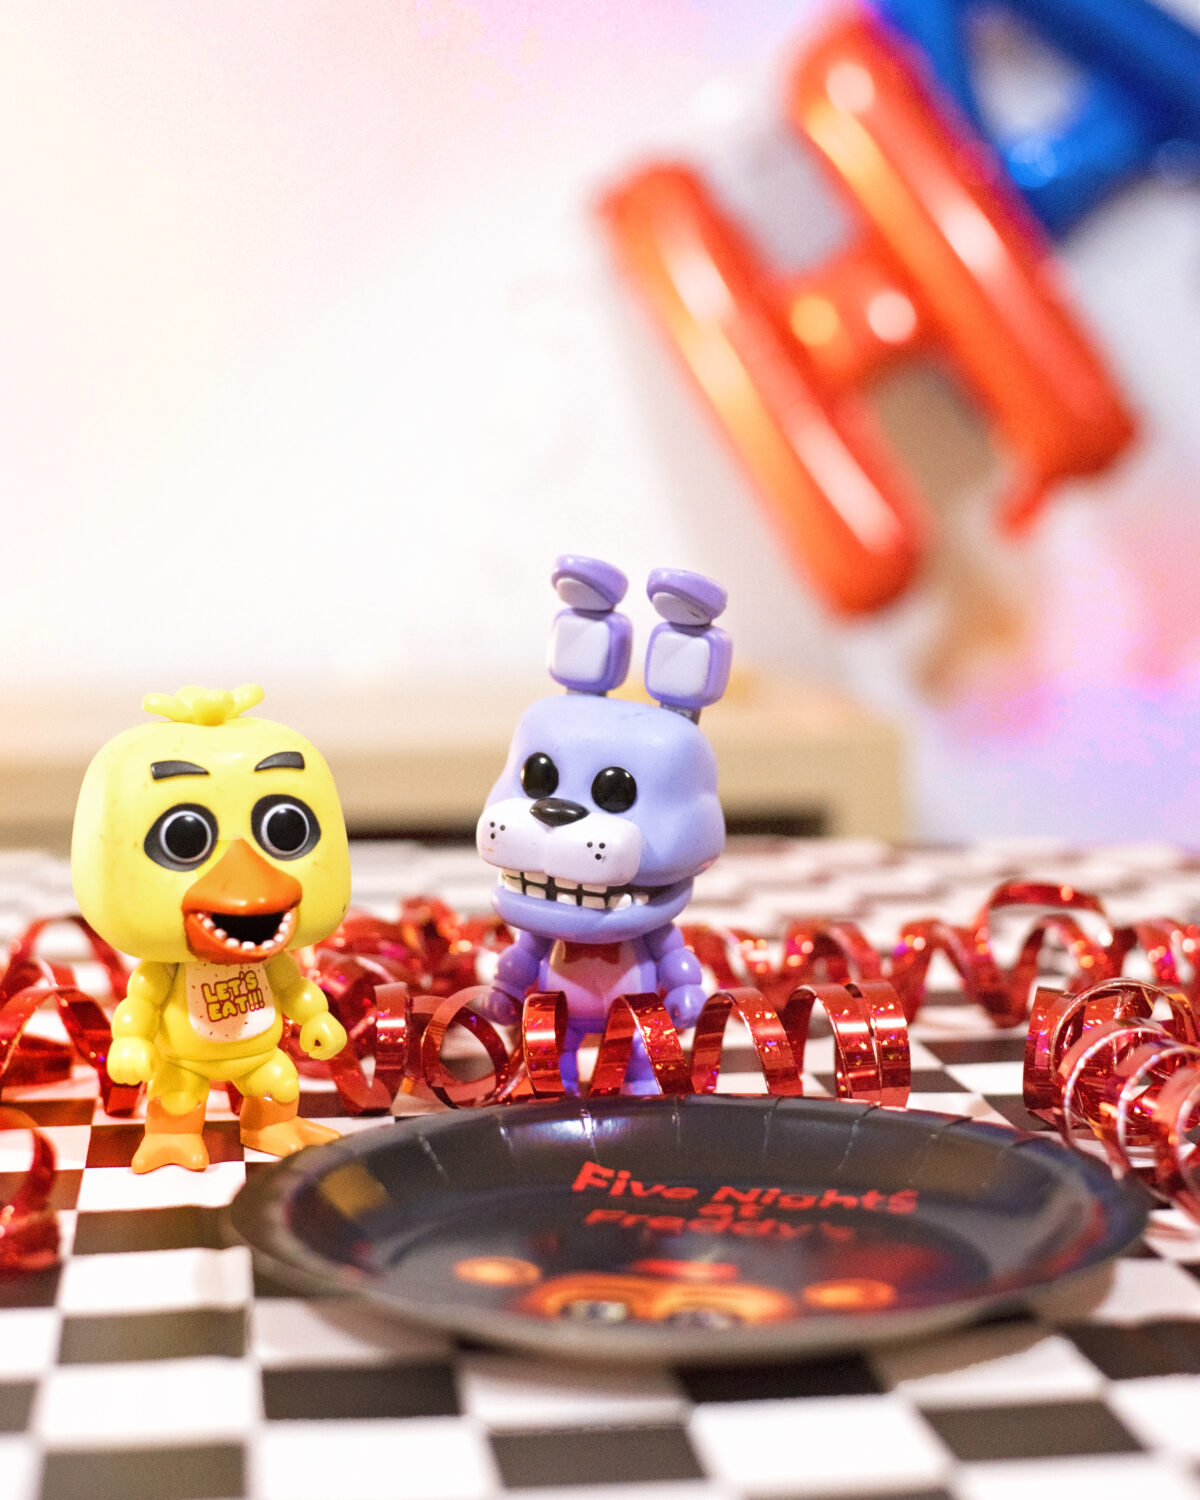 Image shows Party table close up of Pop Vinyl Five Nights at Freddy's figures Bonnie and Chica. They are surrounded by metallic red streamers and there are balloons in the background. Image by keep up with the jones family.